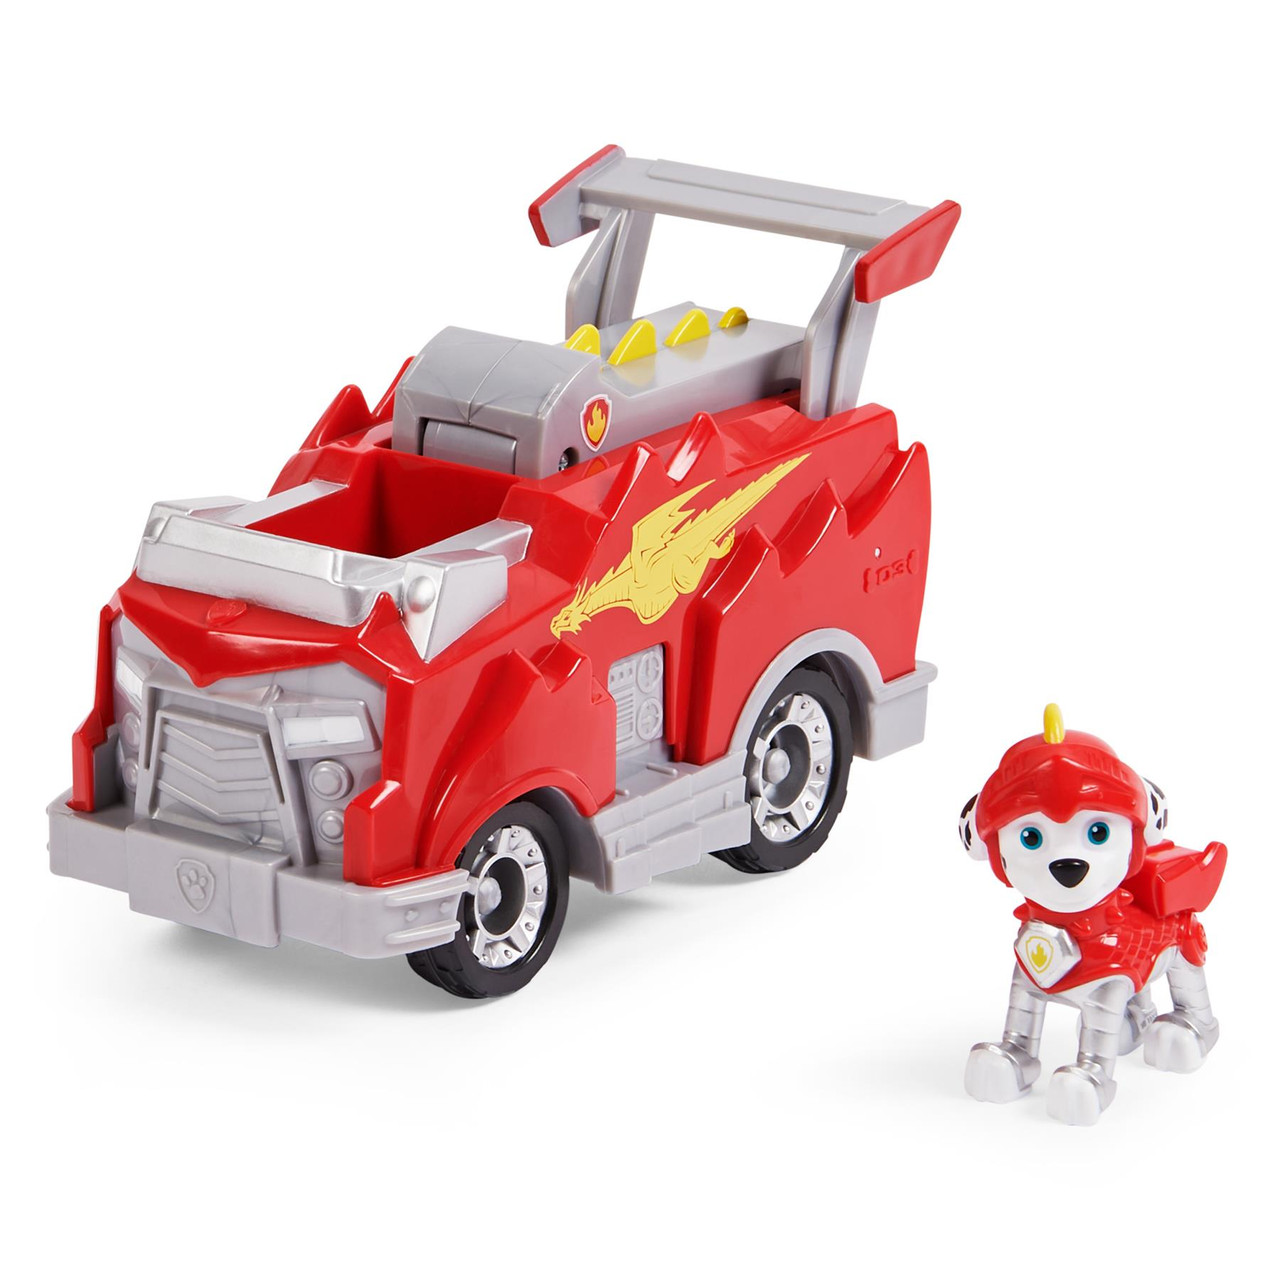 PAW PATROL RESCUE KNIGHTS DELUXE VEHICLE ASST